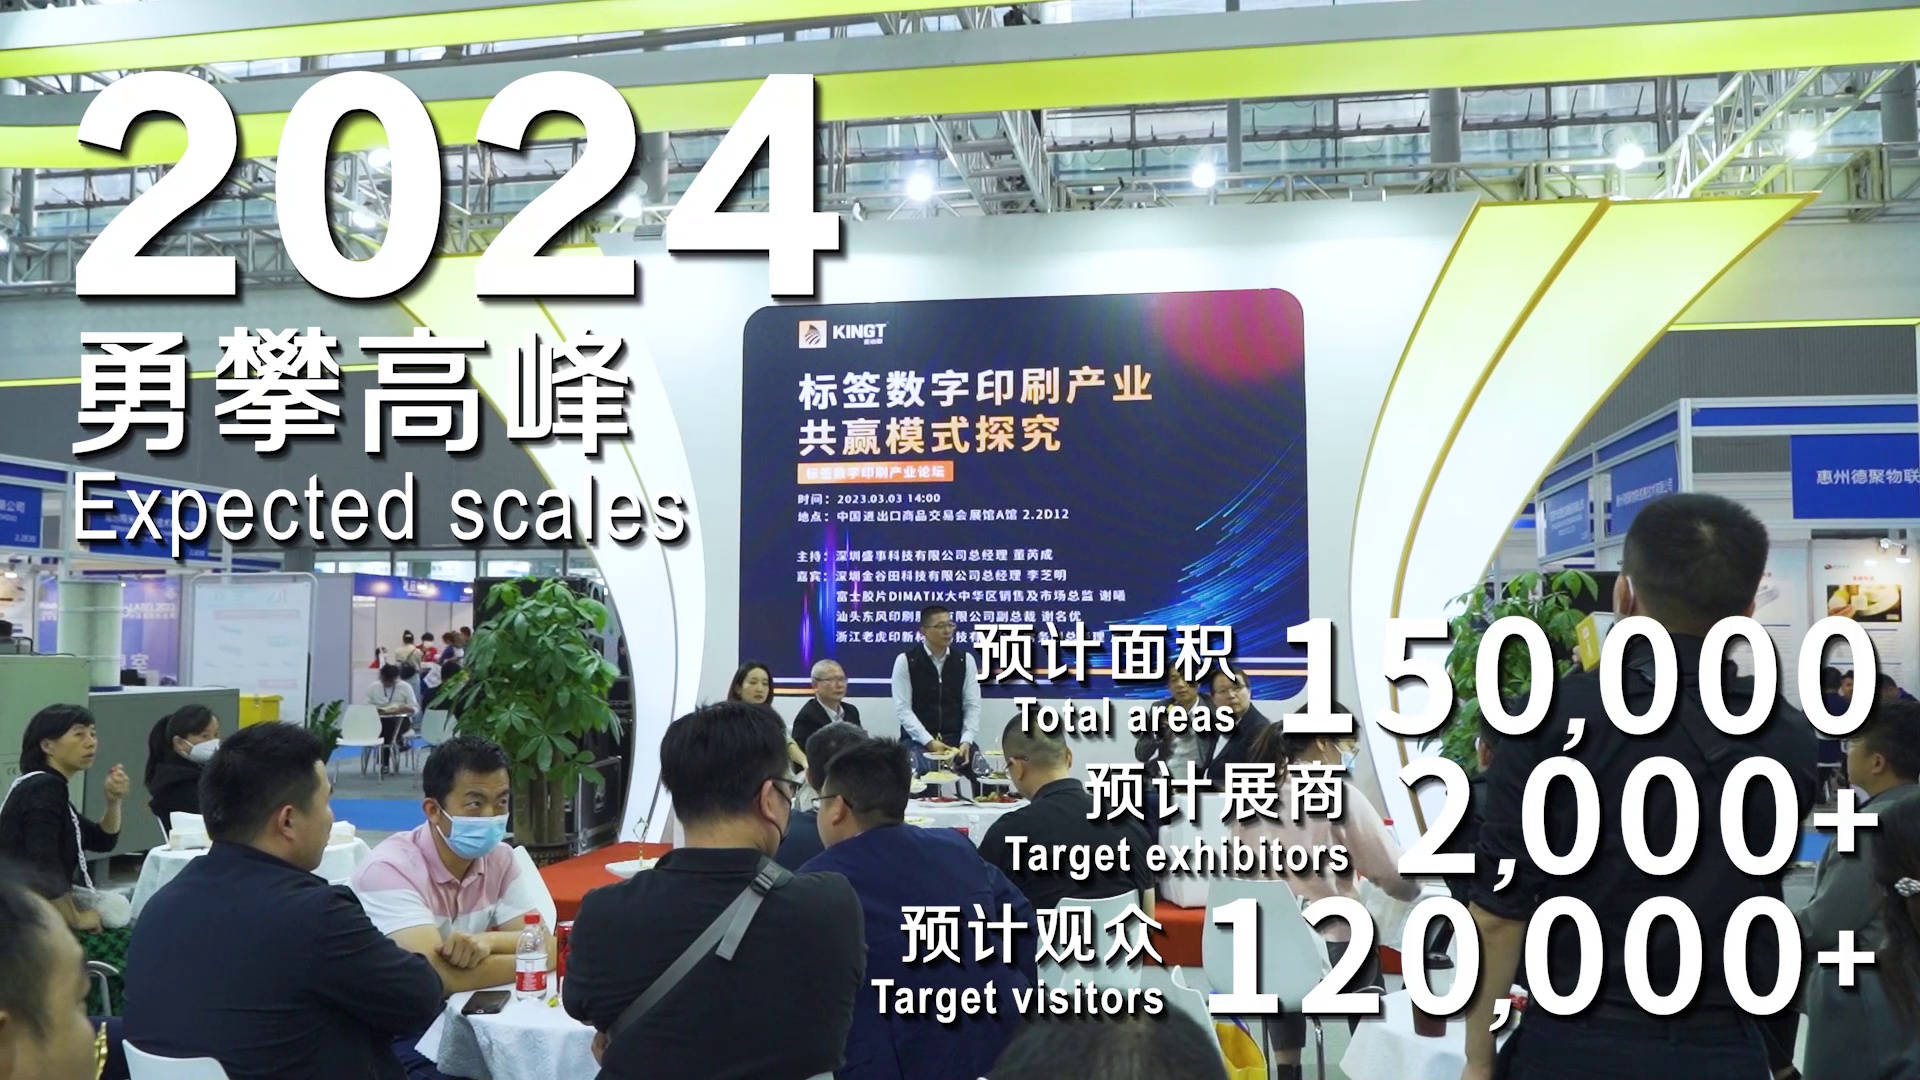 Home - The 30th South China International Exhibition on Printing Industry